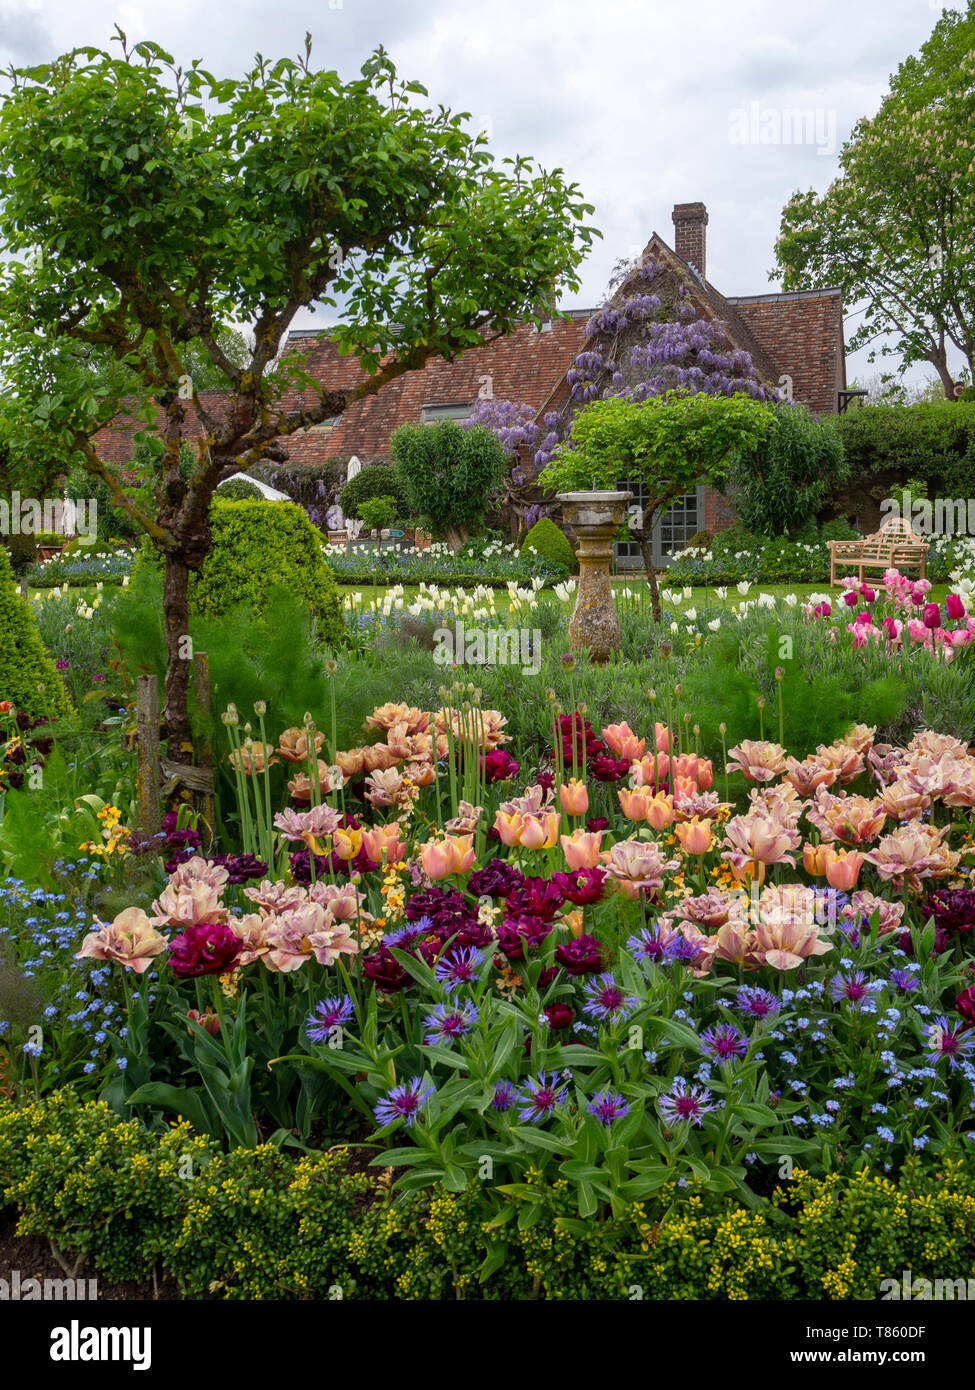 Chenies Manor Gardens in early May featuring La Belle Epoque tulips mass planted with Antraciet tulips and foliage. Portrait view with old buildings. Stock Photo